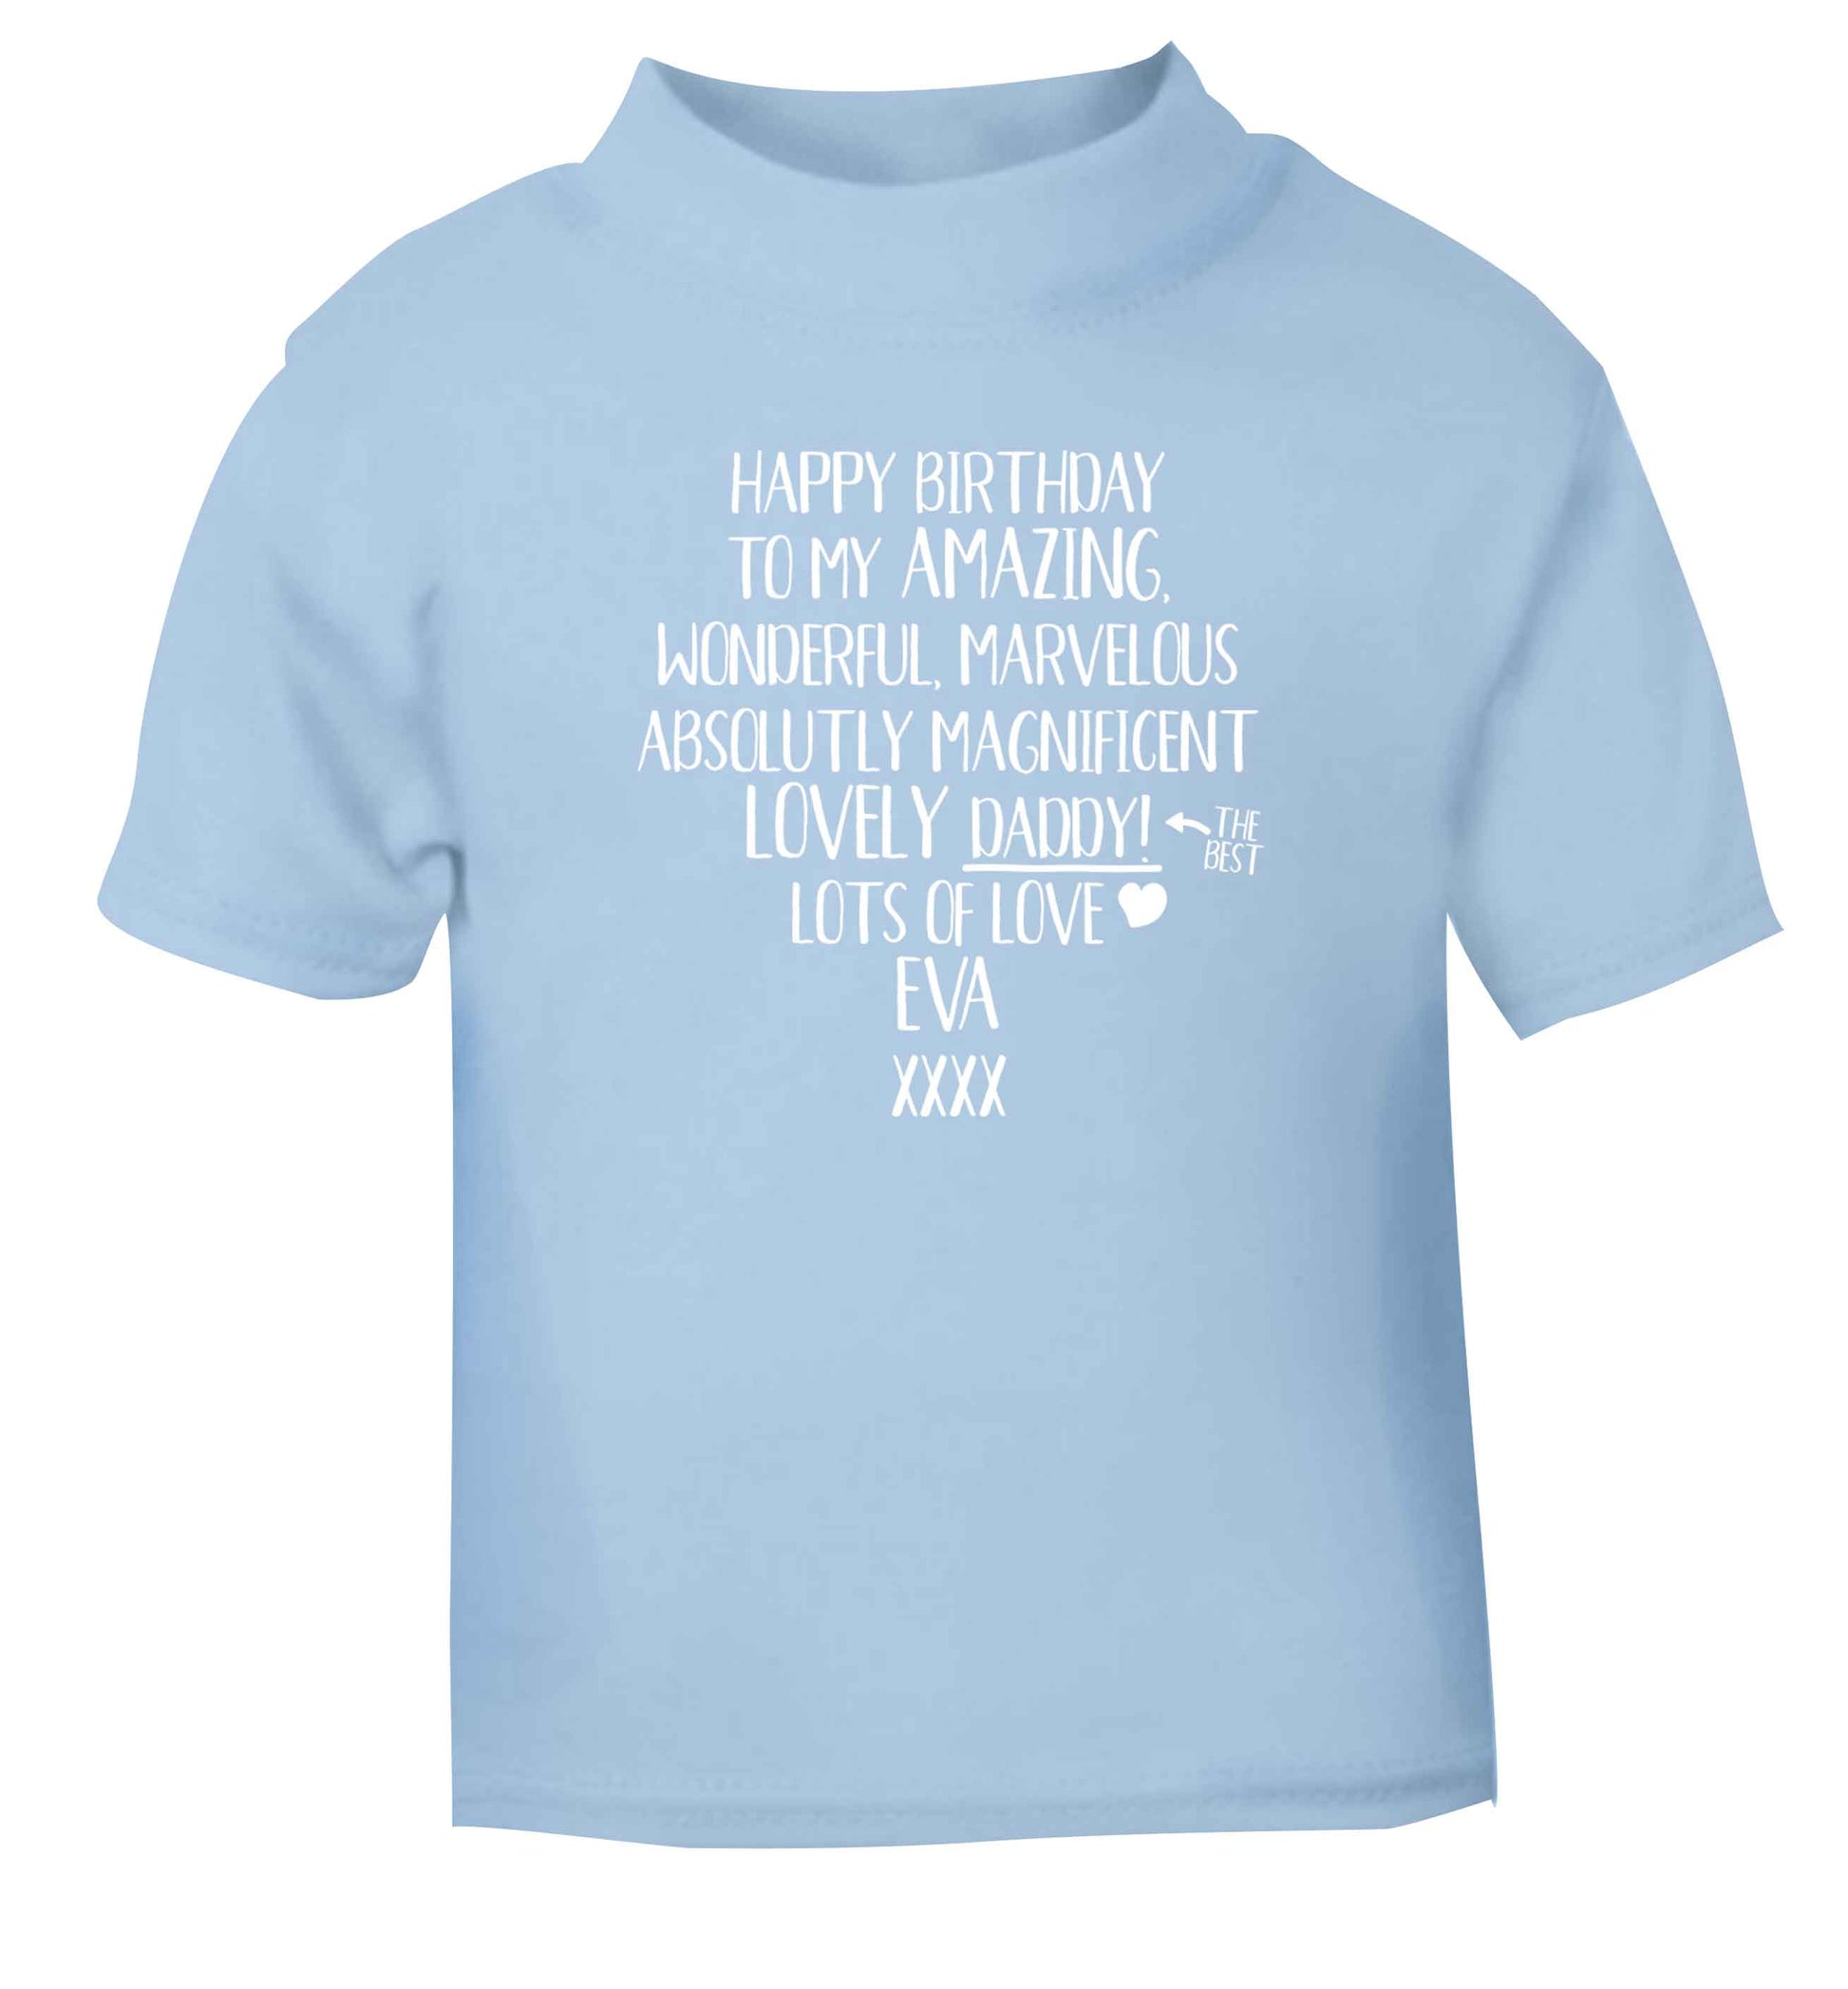 Personalised happy birthday to my amazing, wonderful, lovely daddy light blue Baby Toddler Tshirt 2 Years